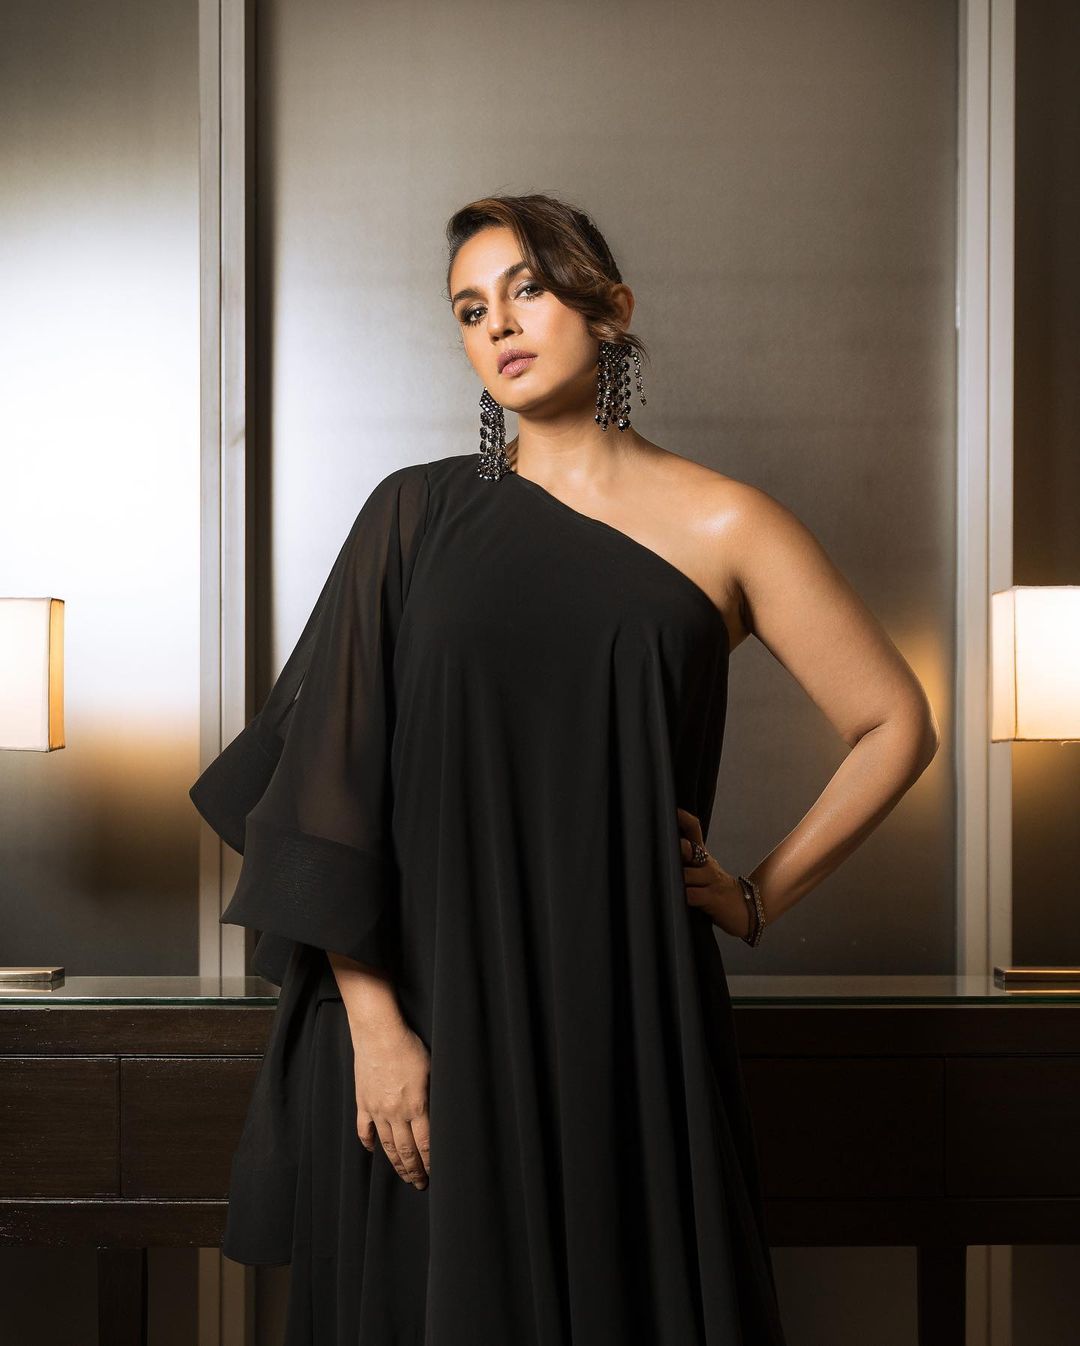 Actress huma qureshi latest fashion and stylish looks-Actresshuma, Qureshi Latest, Qureshilatest, Qureshi Trendy, Maharanihuma, Maharanirani, Huma Qureshi Photos,Spicy Hot Pics,Images,High Resolution WallPapers Download